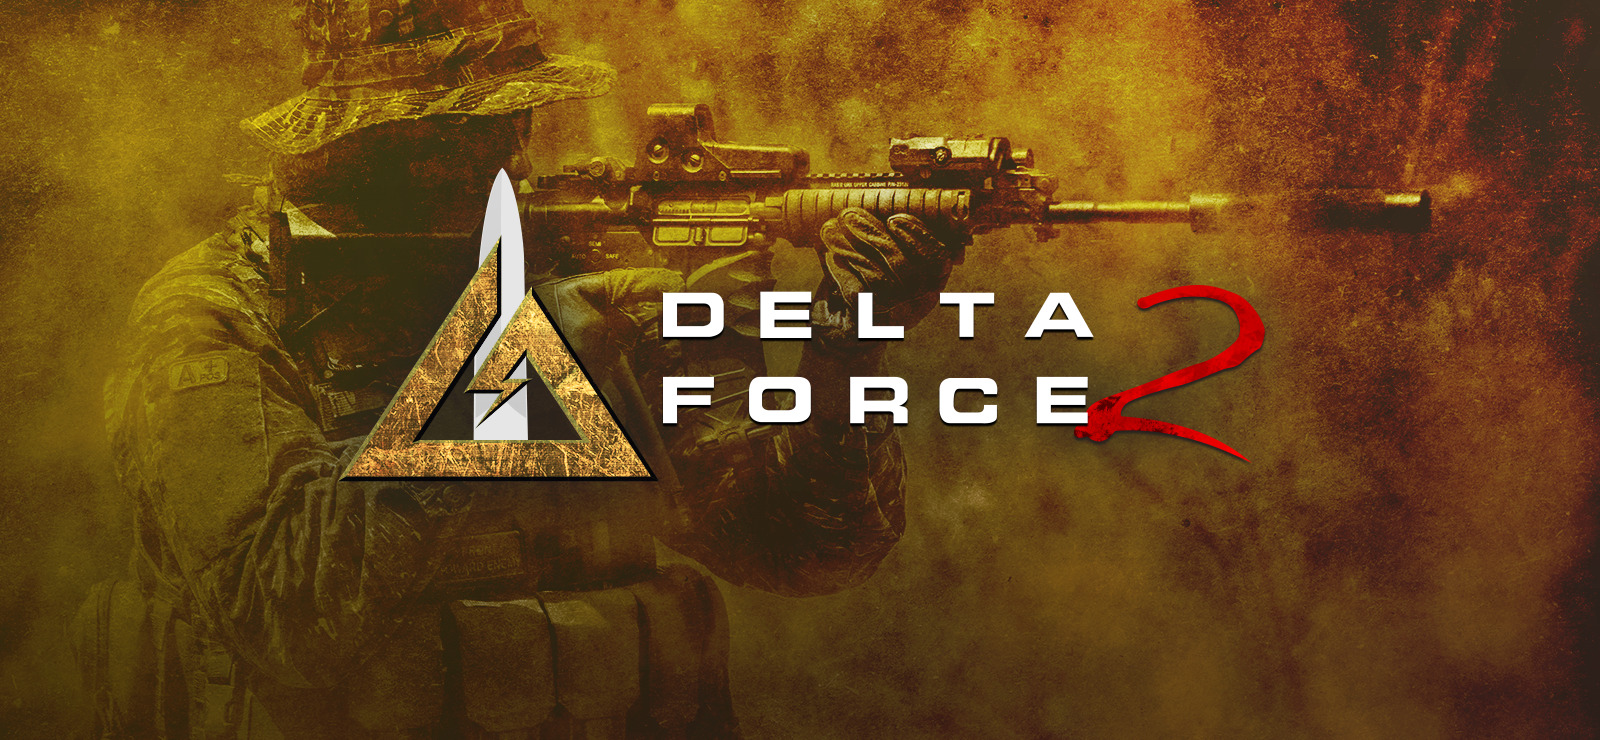 delta force 2 full movie download